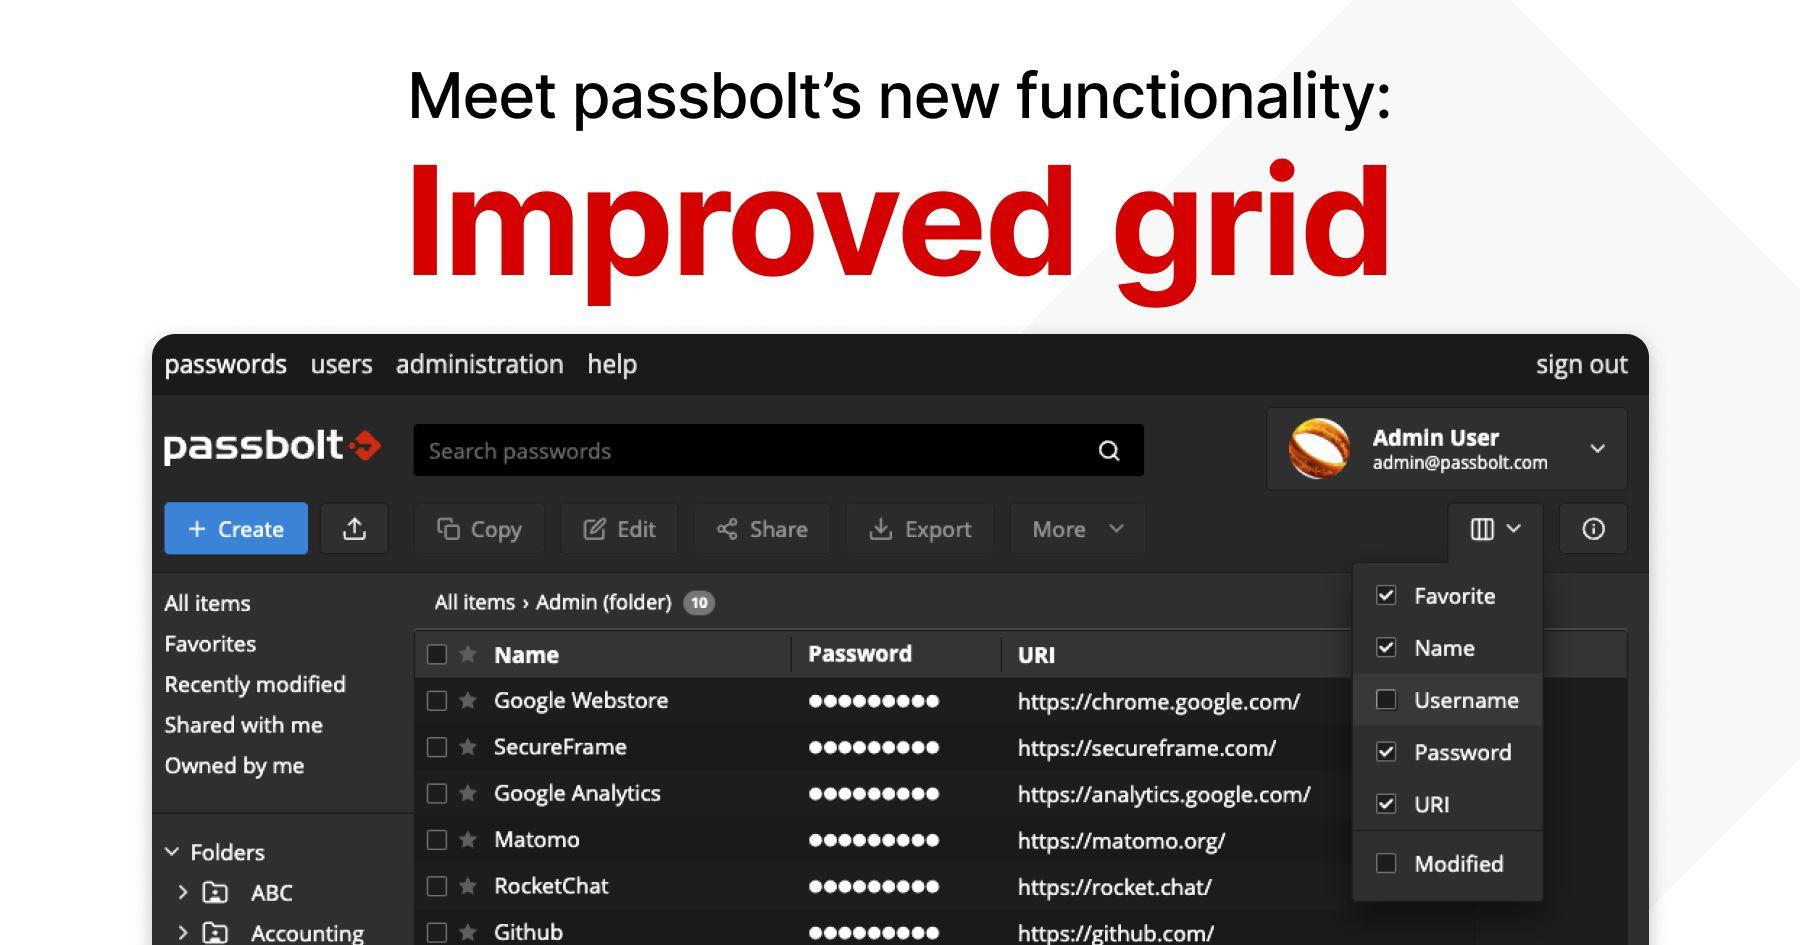 Meet passbolt's new functionality: Improved Grid